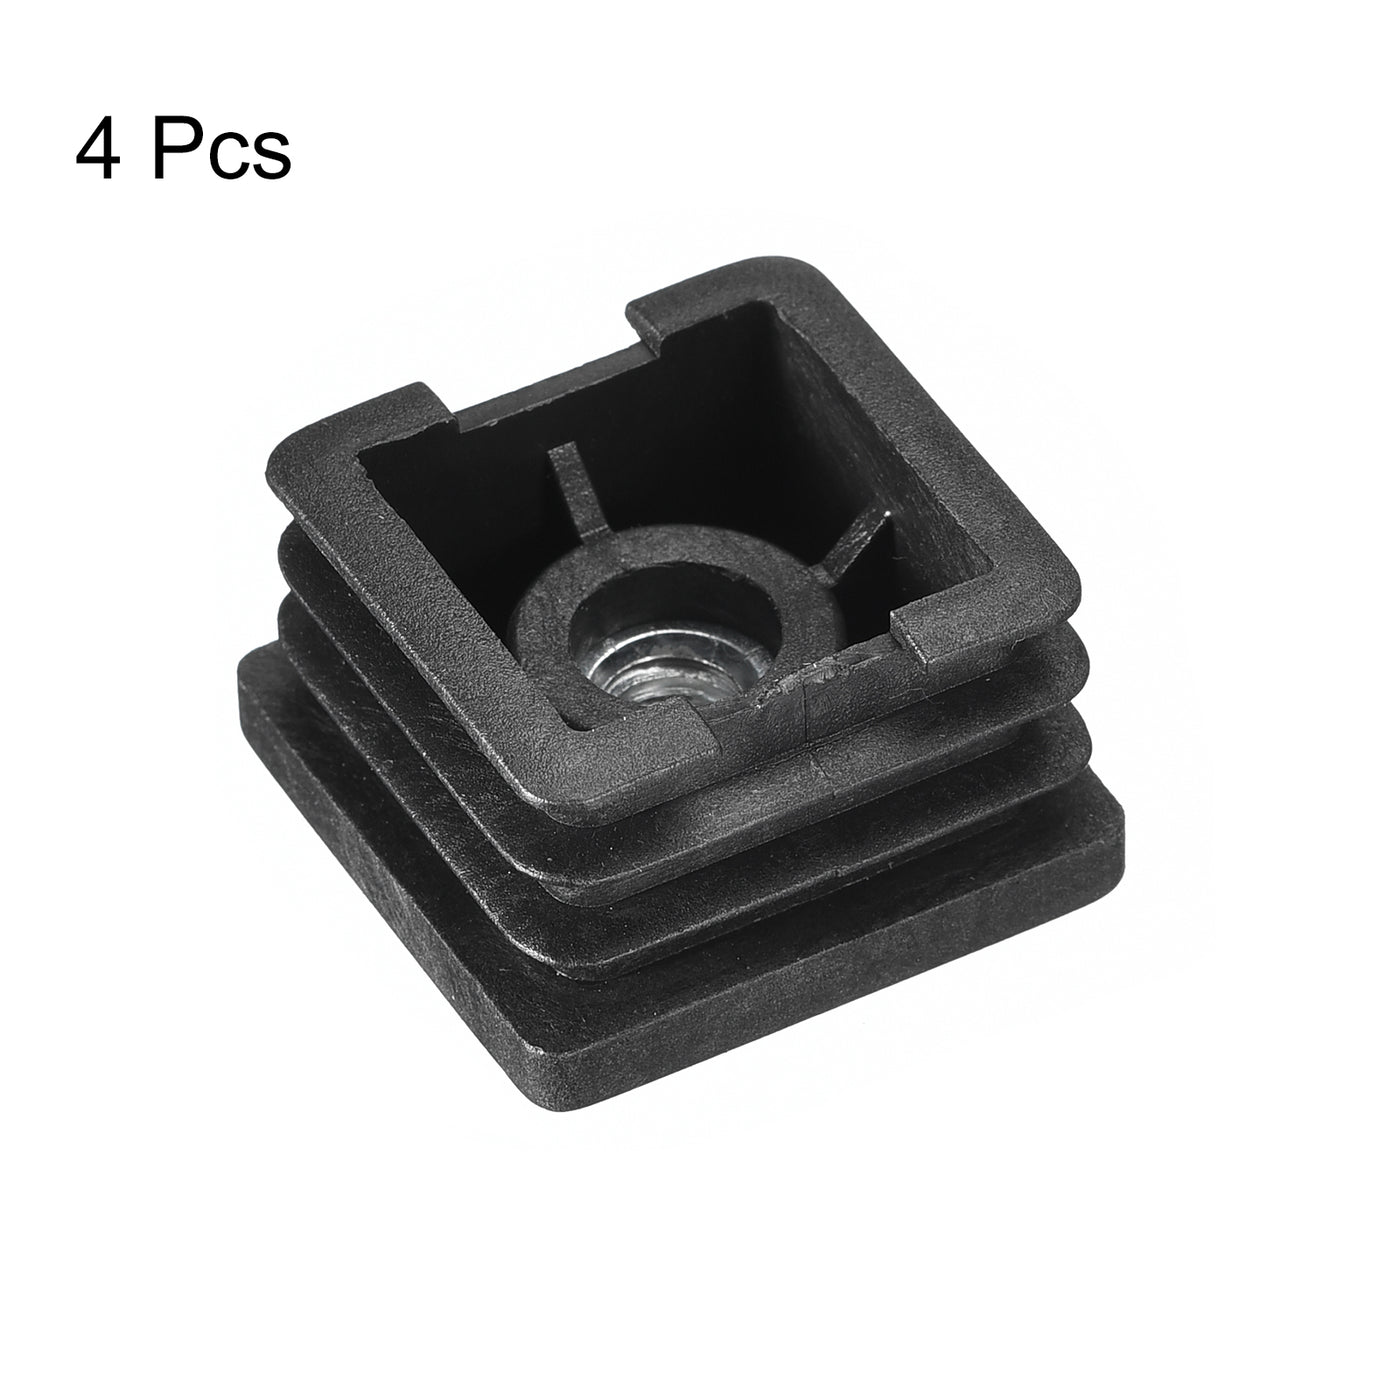 uxcell Uxcell 4Pcs 1.38"x1.38" Caster Insert with Thread, Square M8 Thread for Furniture